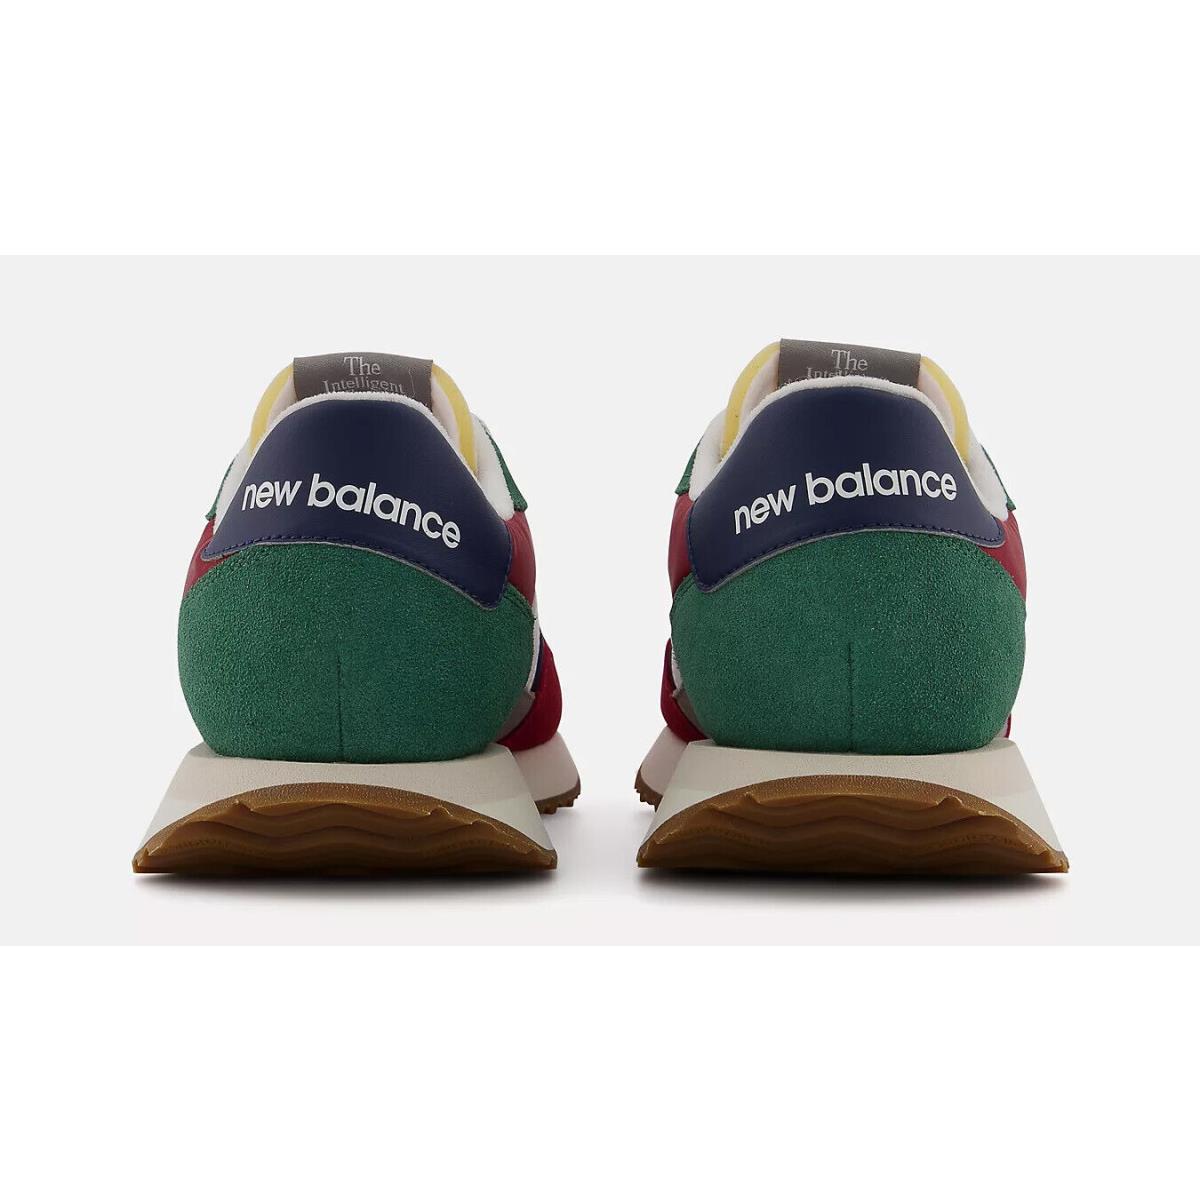 New Balance shoes  - Red/Green/Navy Blue 20